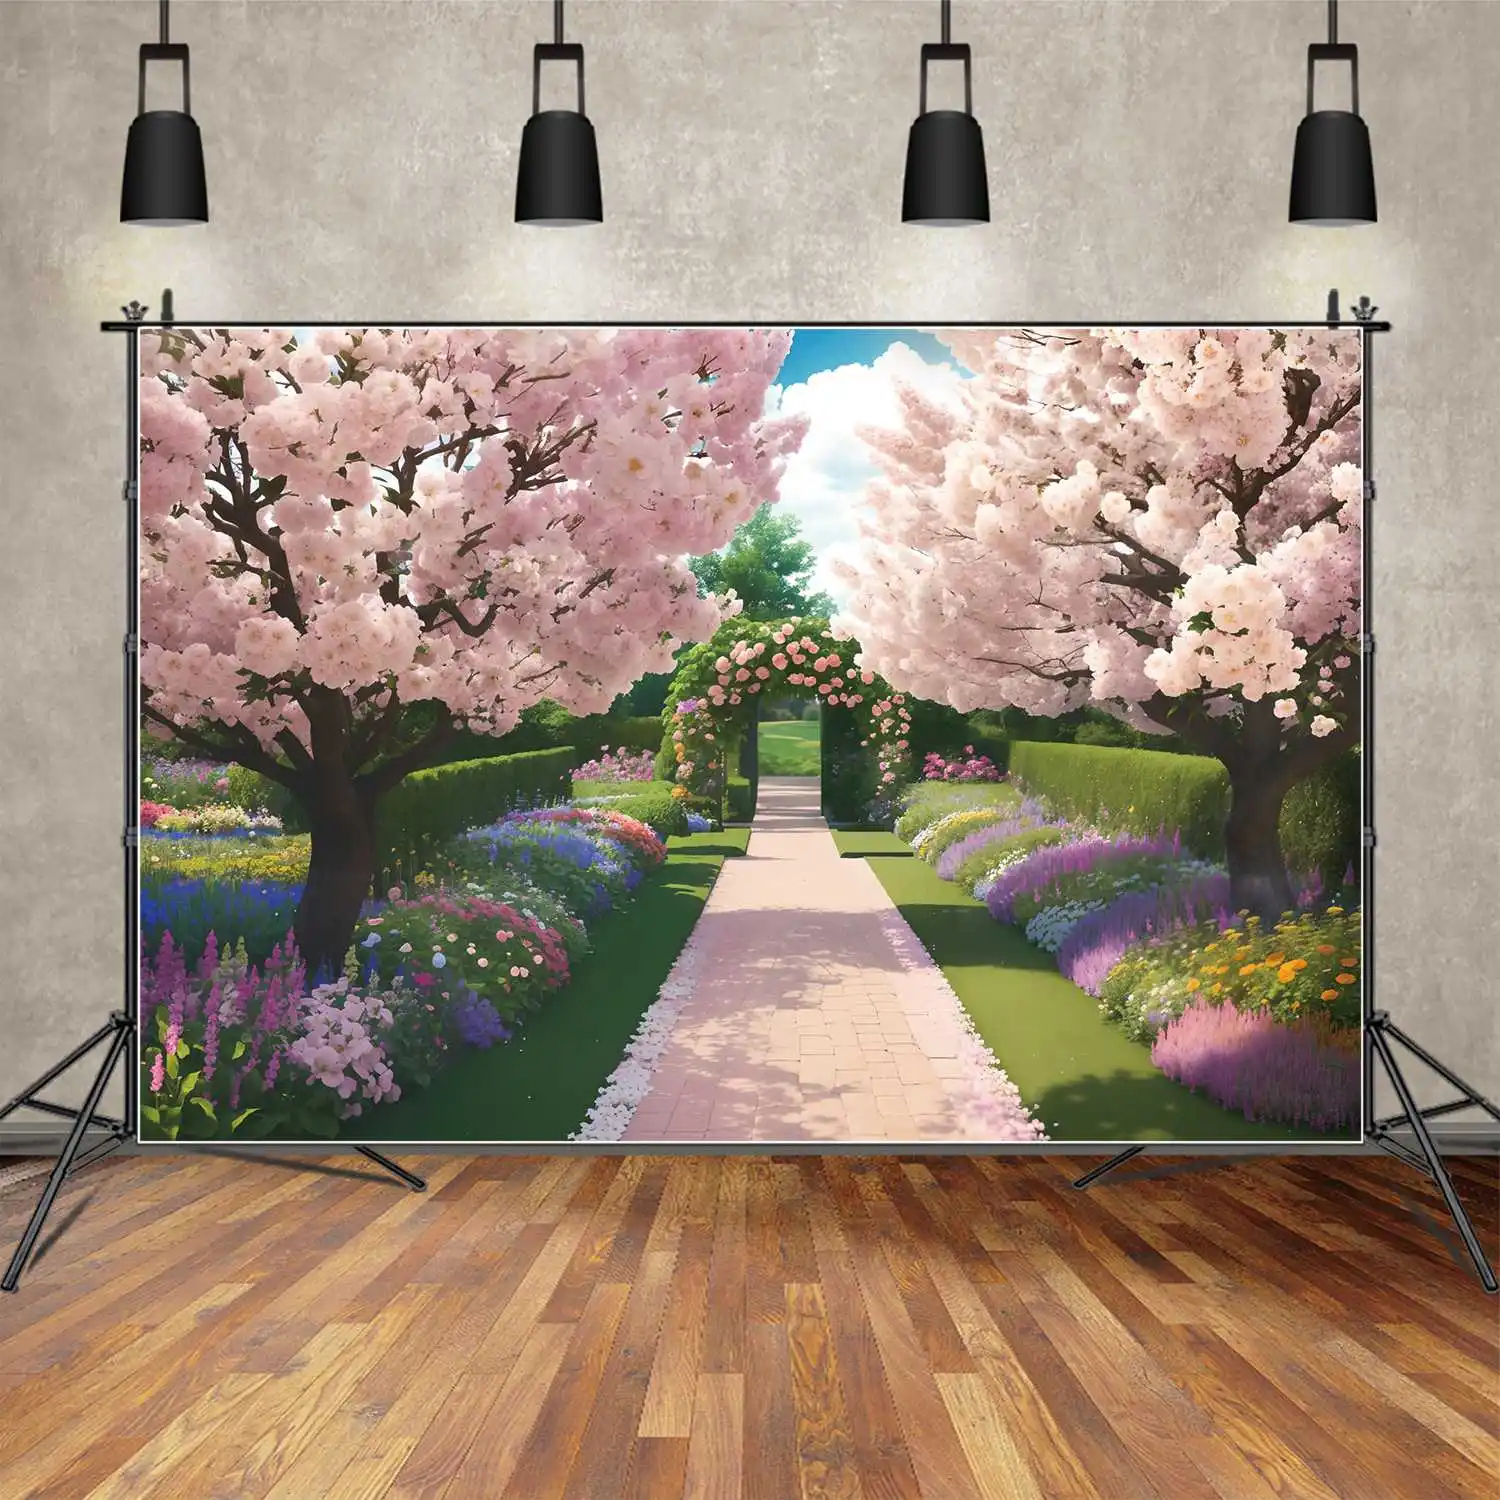 

Home Floral Garden Photography Backdrops Decorations Green Grass Field Customized Baby Photobooth Photo Backgrounds Props